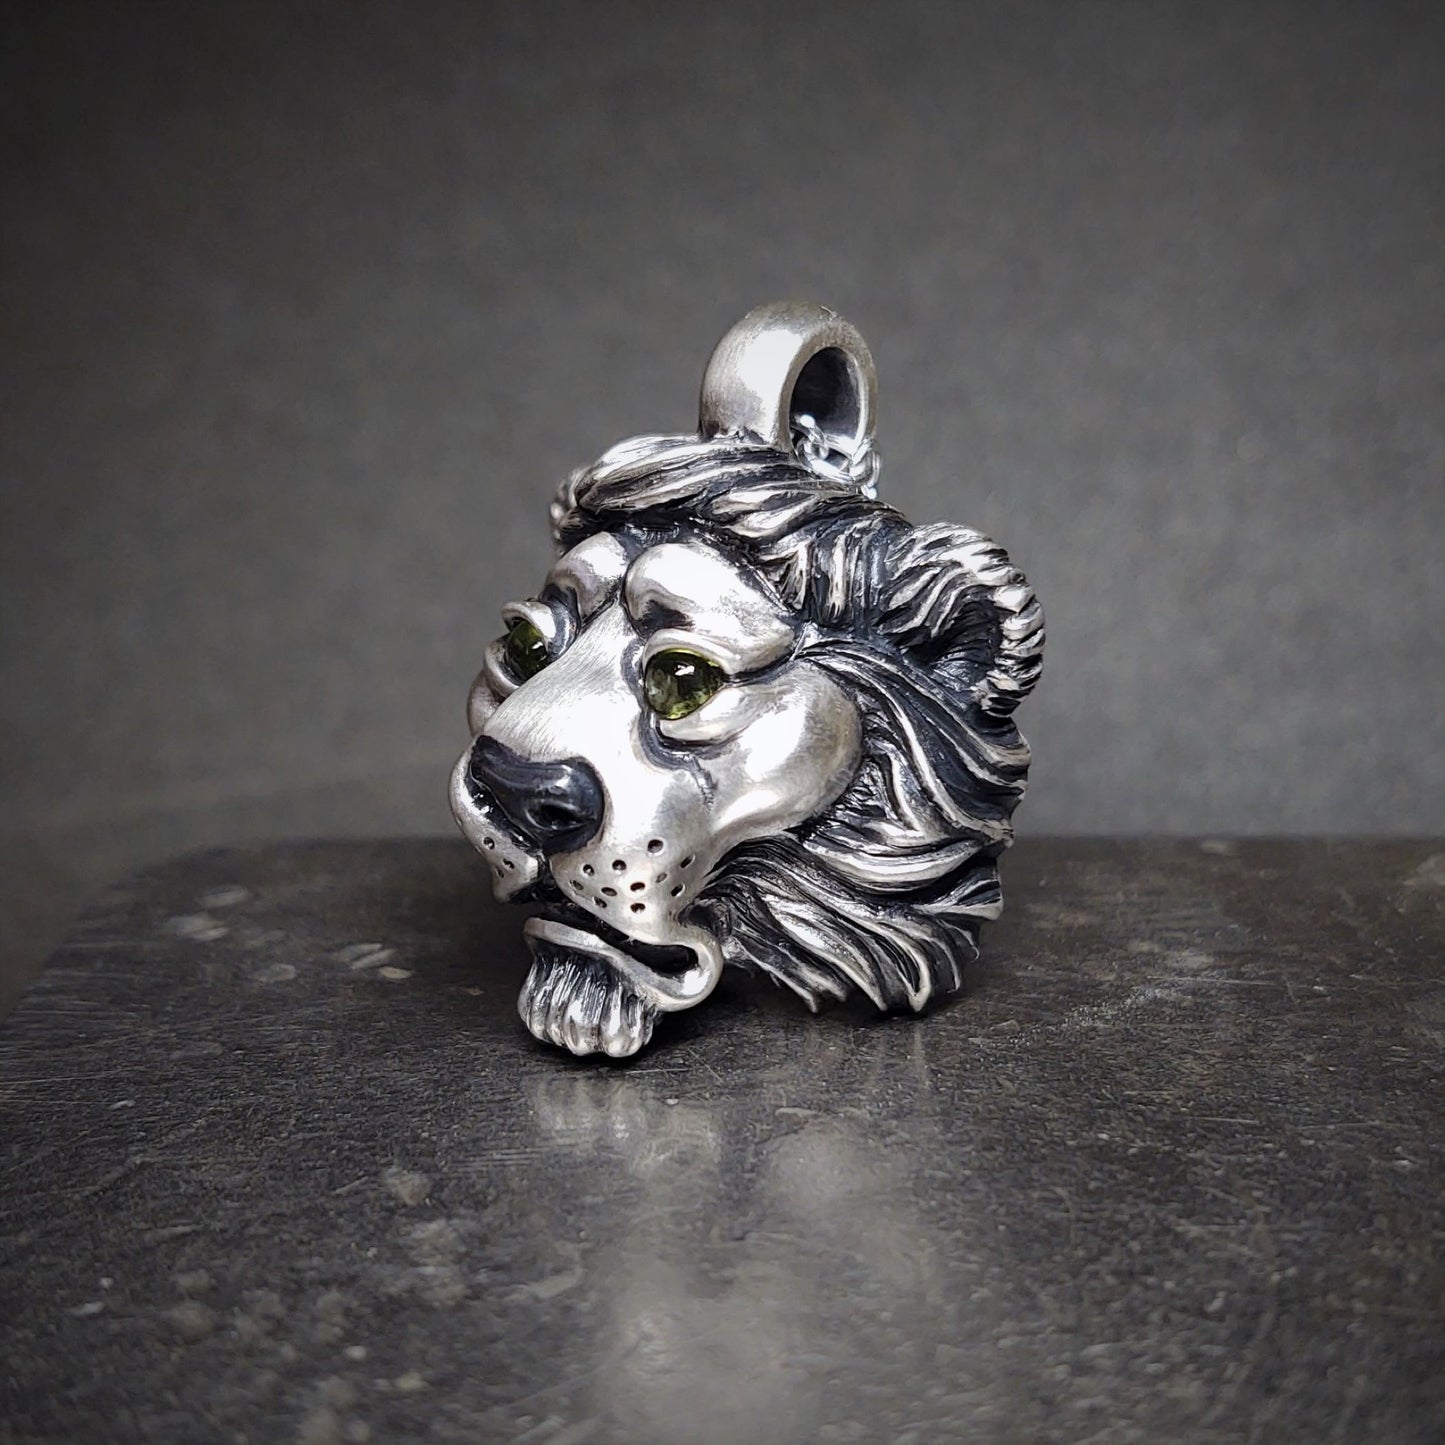 Regal Lion necklace. Mid-size lion's head pendant in sterling silver with natural gemstone eyes and solid silver chain. Made to order © Adrian Ashley